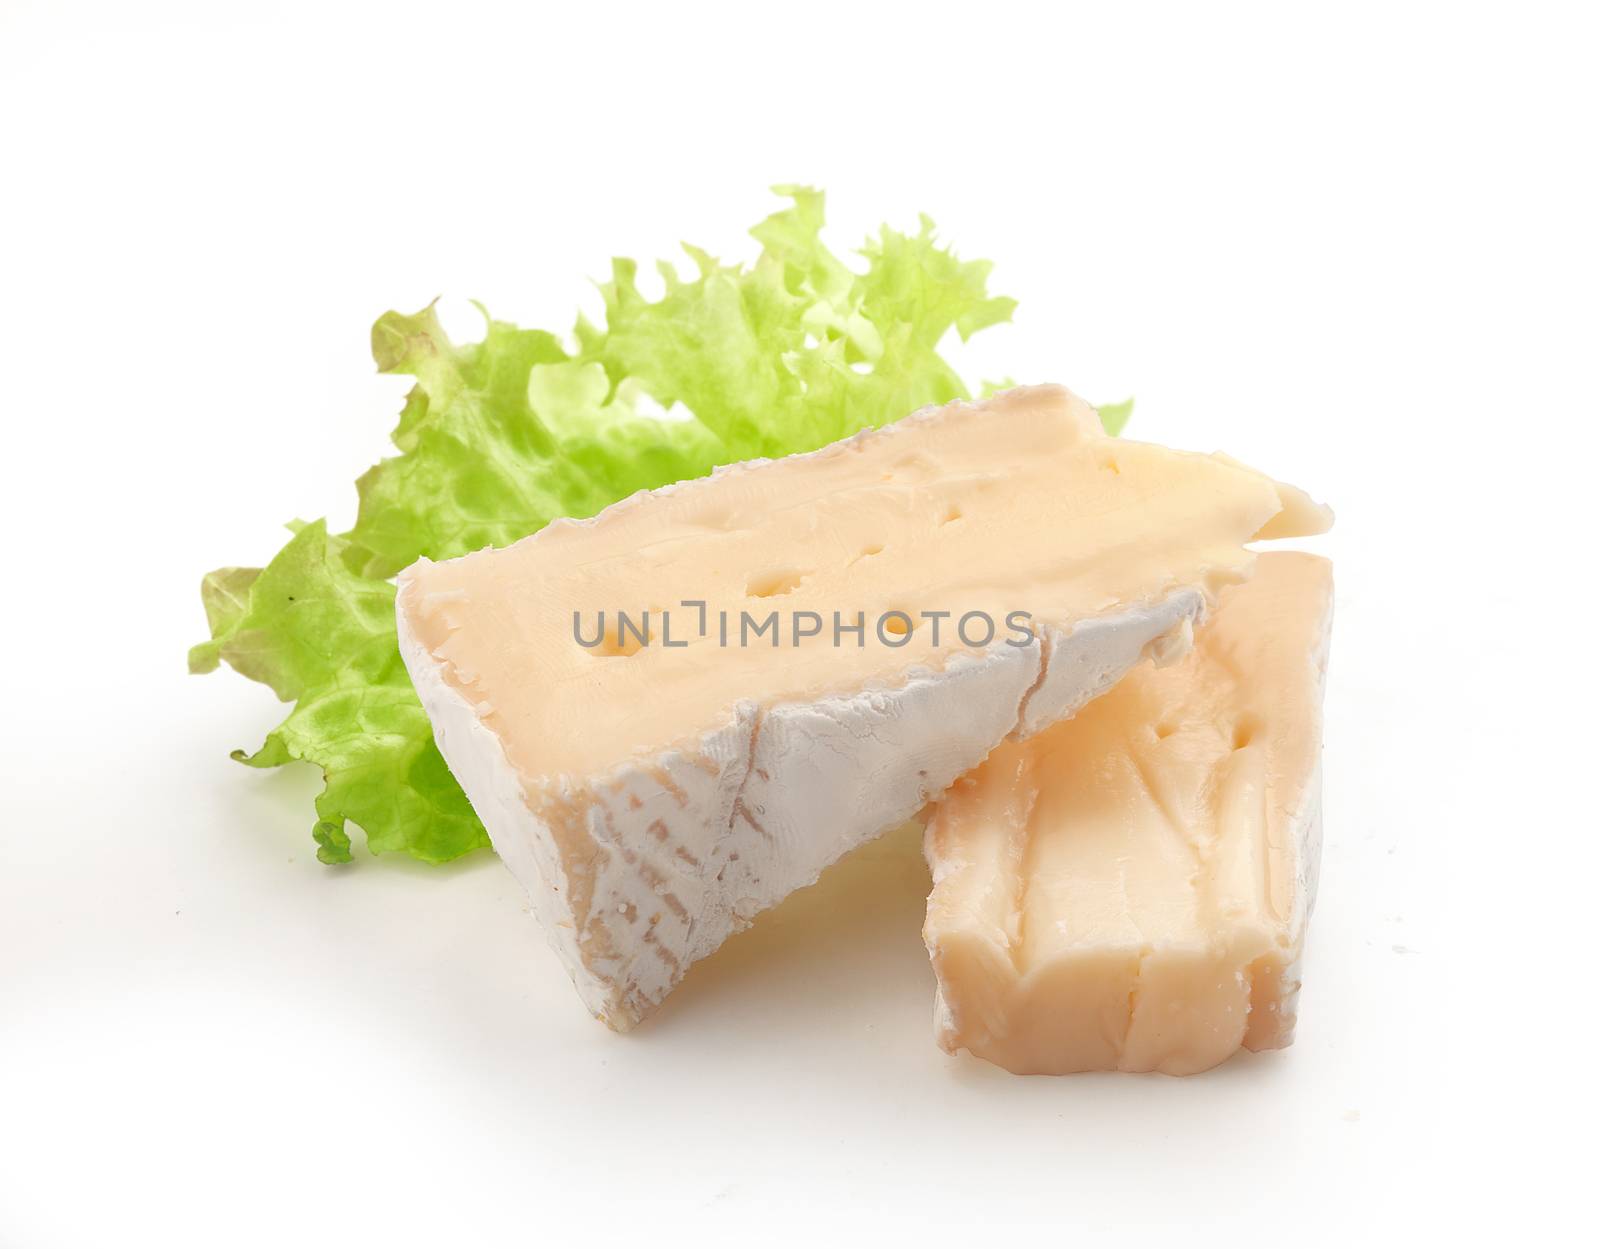 Camembert pieces with lettuce by Angorius